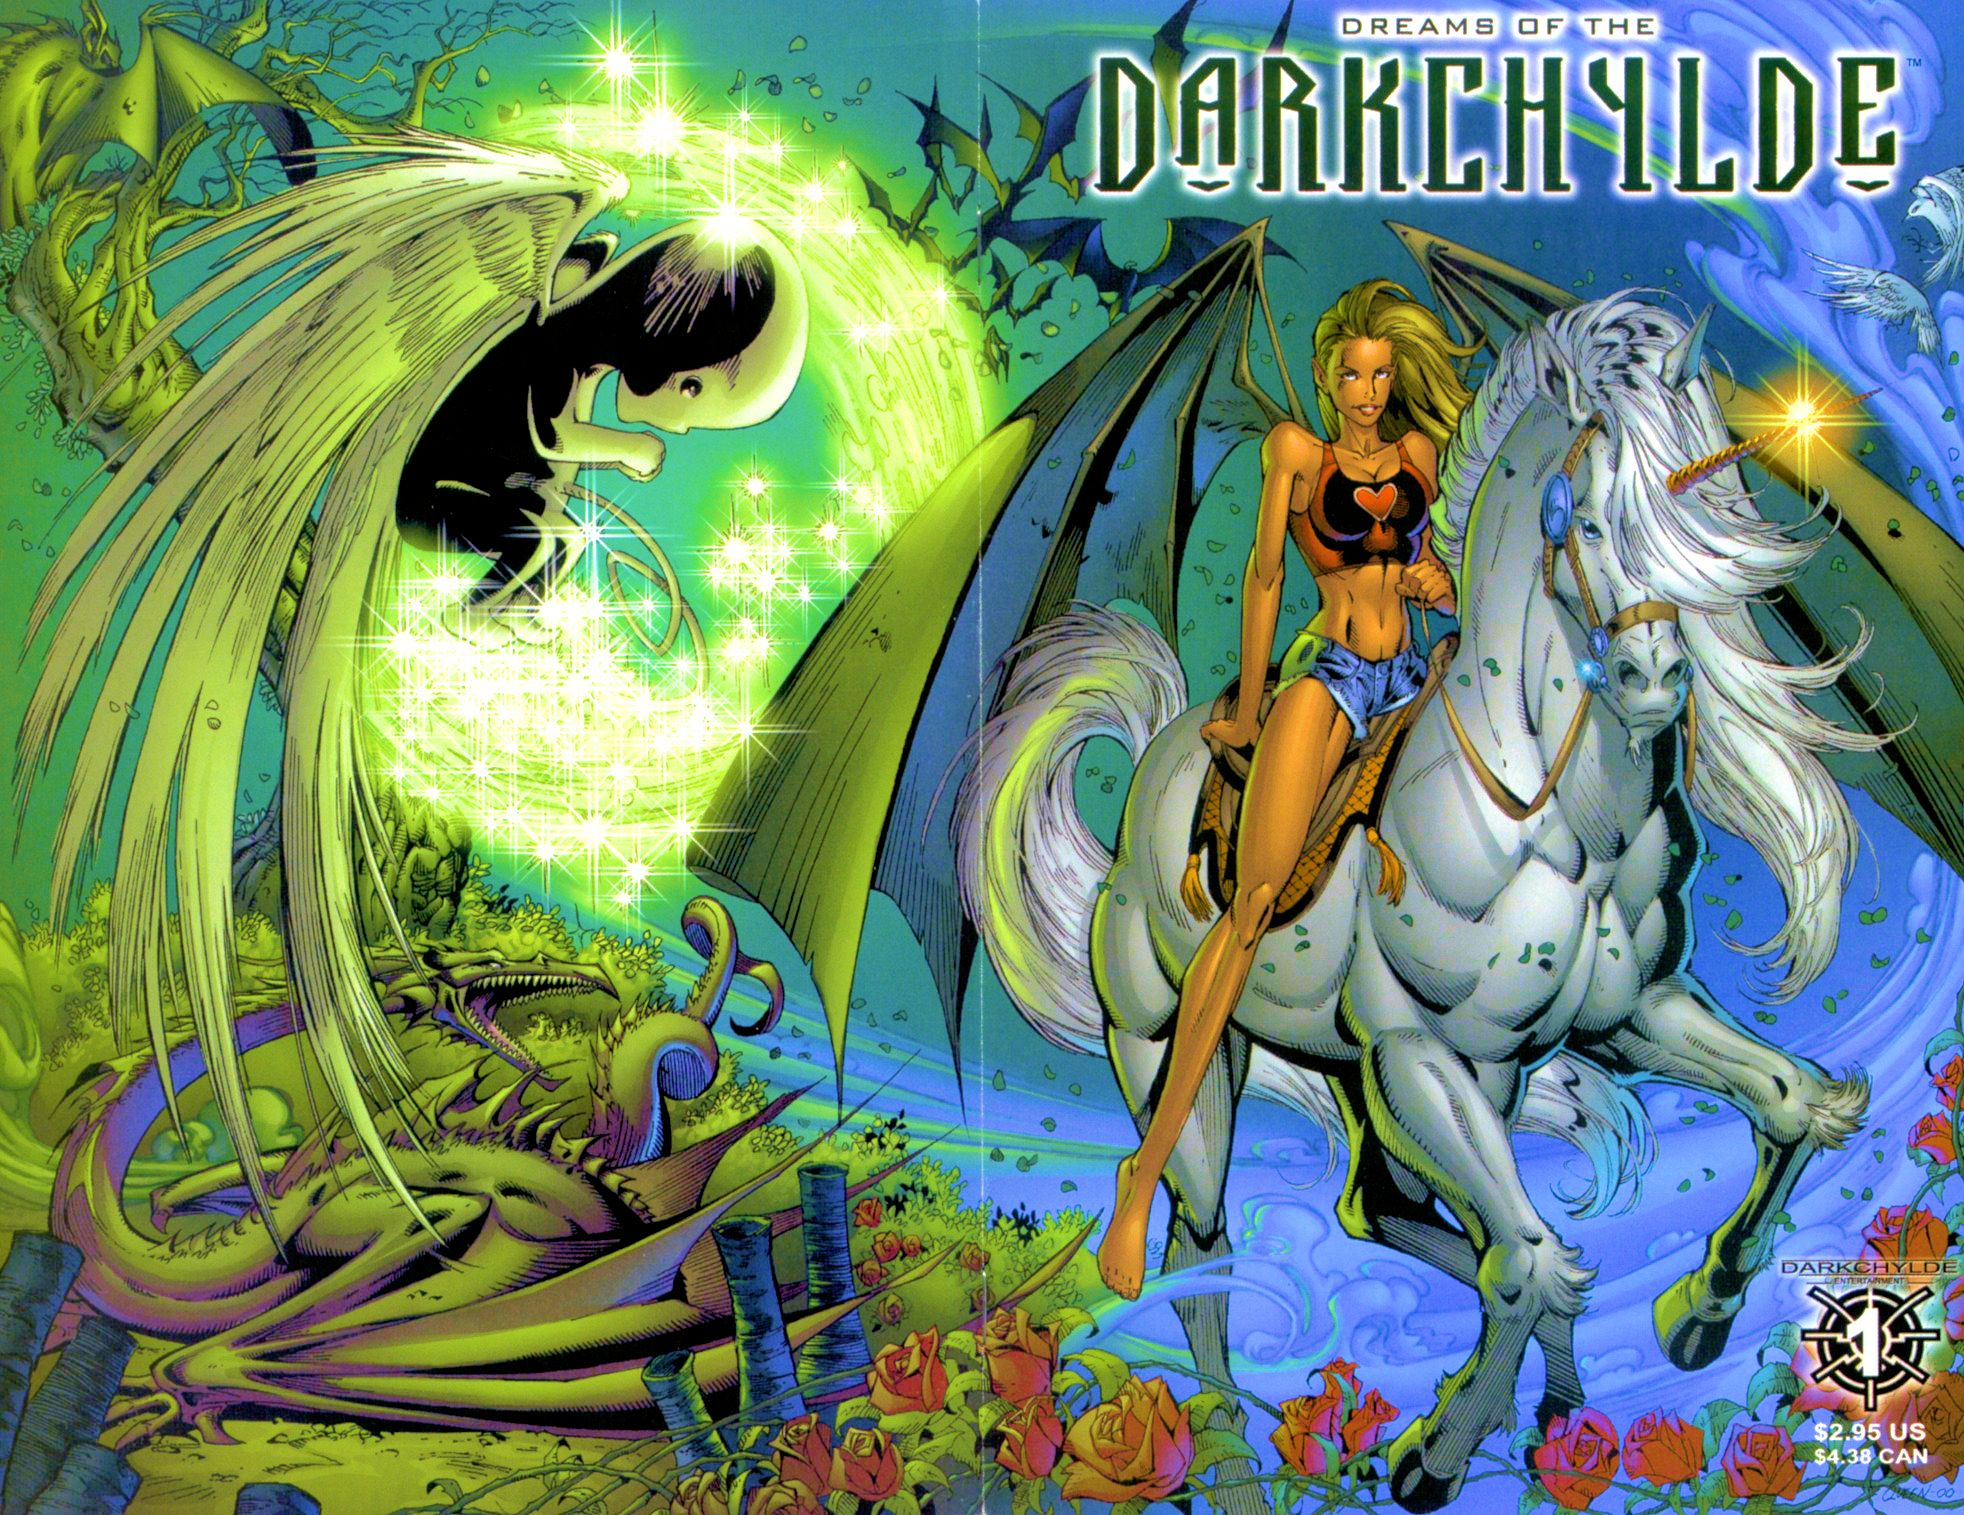 Read online Dreams of the Darkchylde comic -  Issue #1 - 1